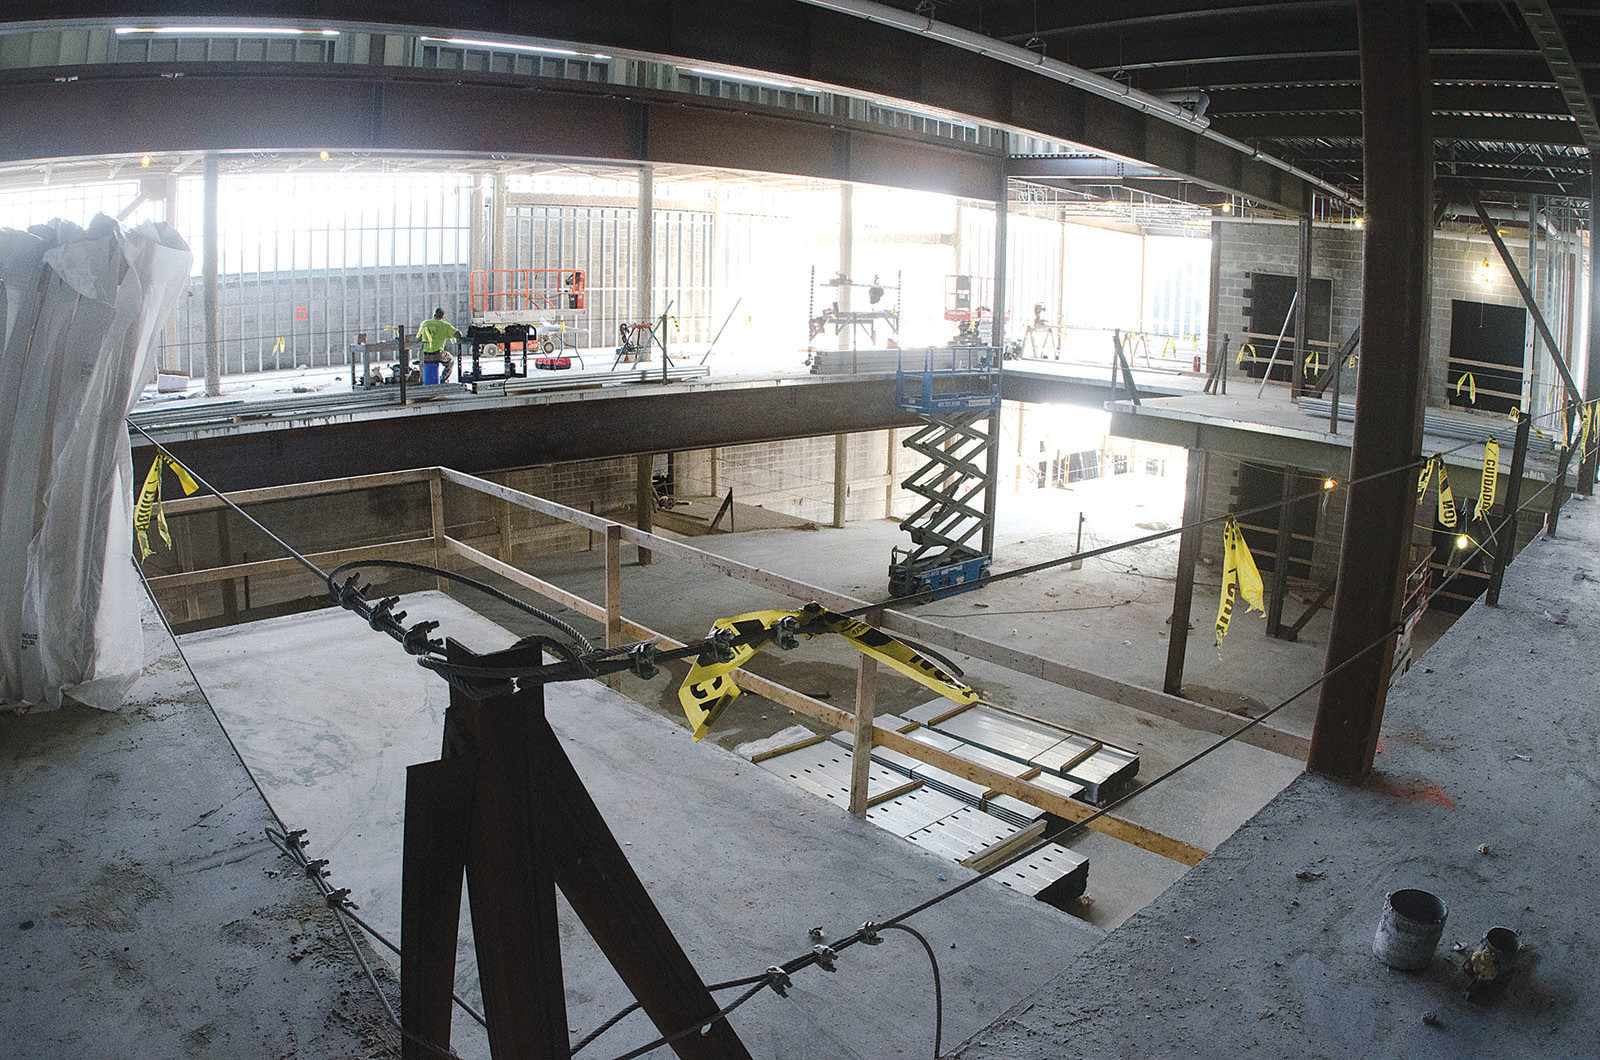 Barrington received reimbursements from the state when building the new middle school — pictured is the school's media center under construction a few years ago.